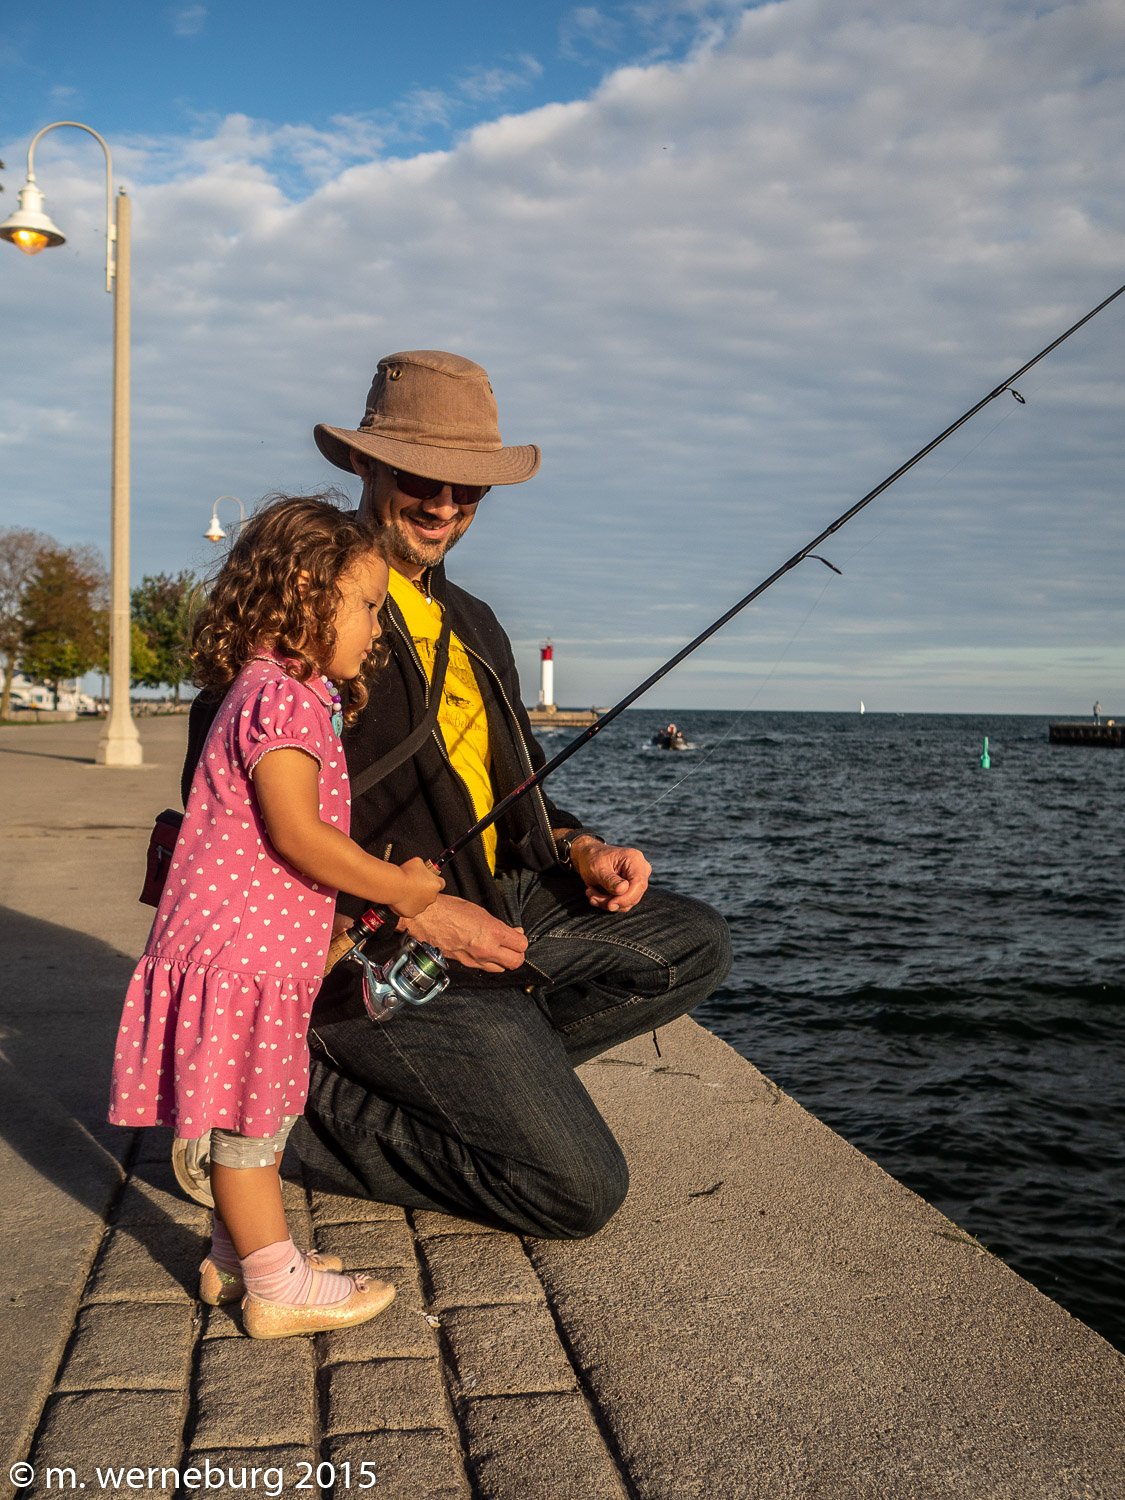 the little one fishes in lake ontario